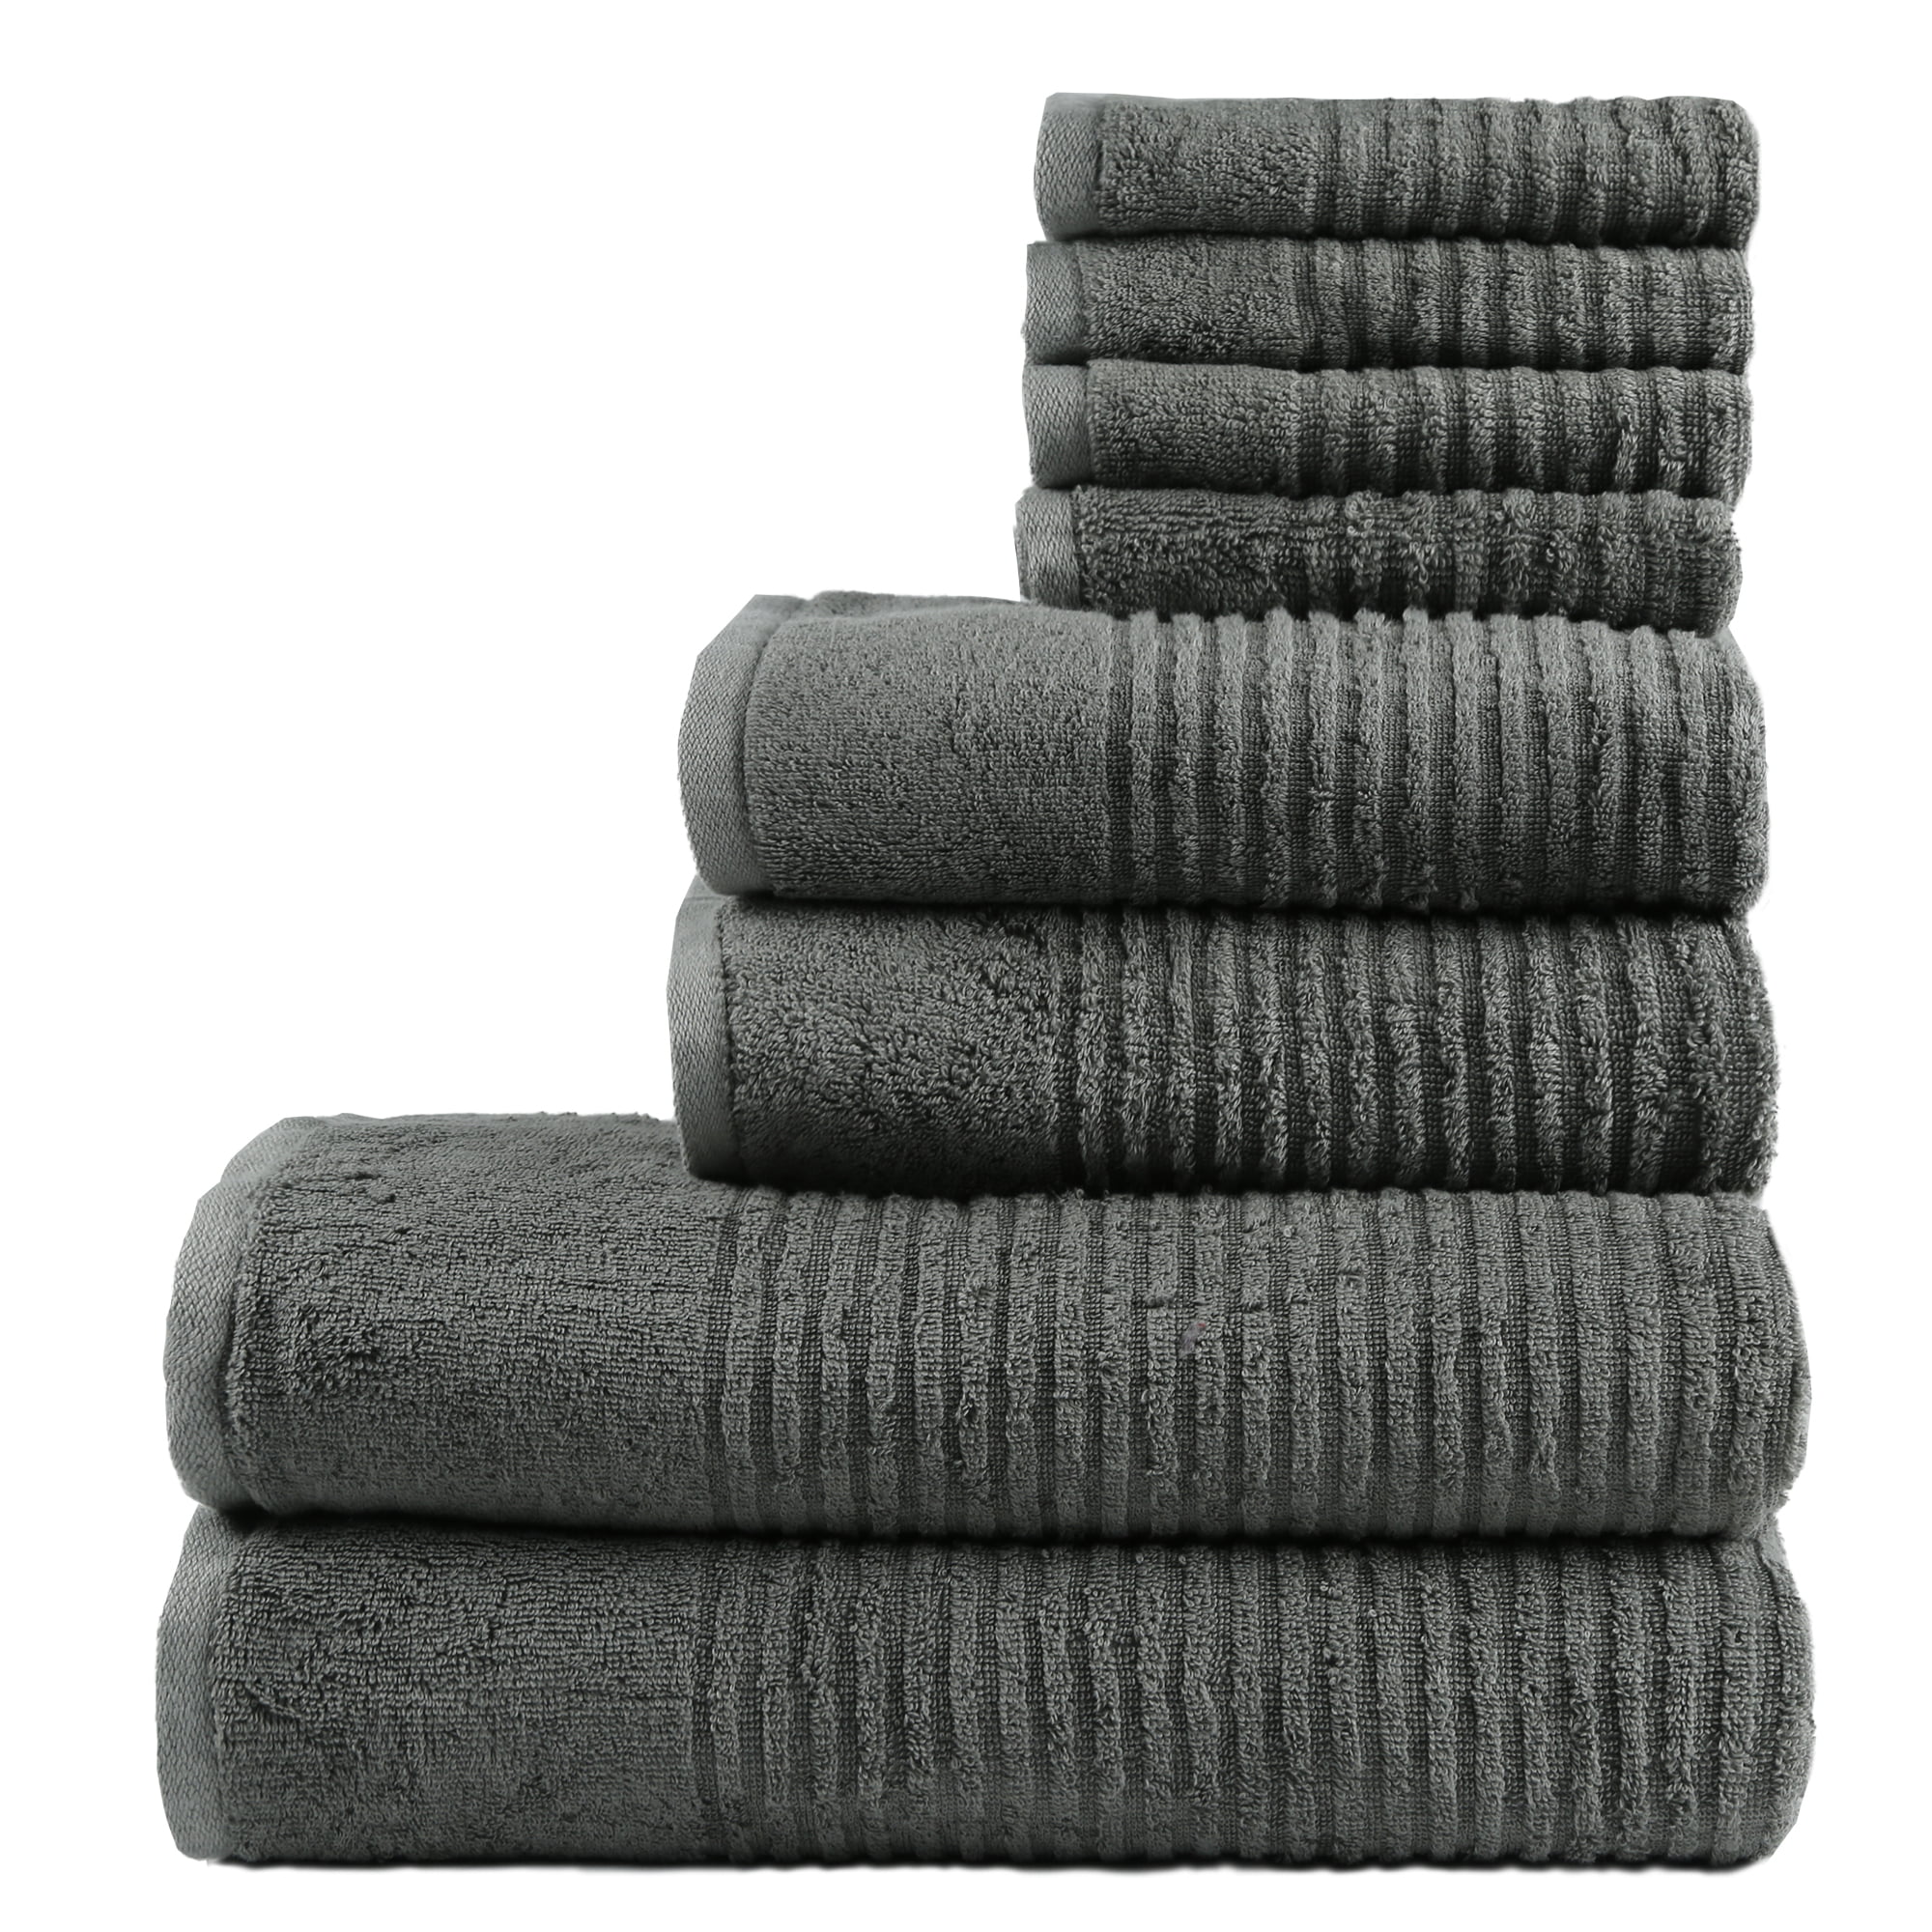 Ring Spun 100% Cotton Highly Absorbent Daily Us Details about   Bath Towels Set of 4 Pink 27x54